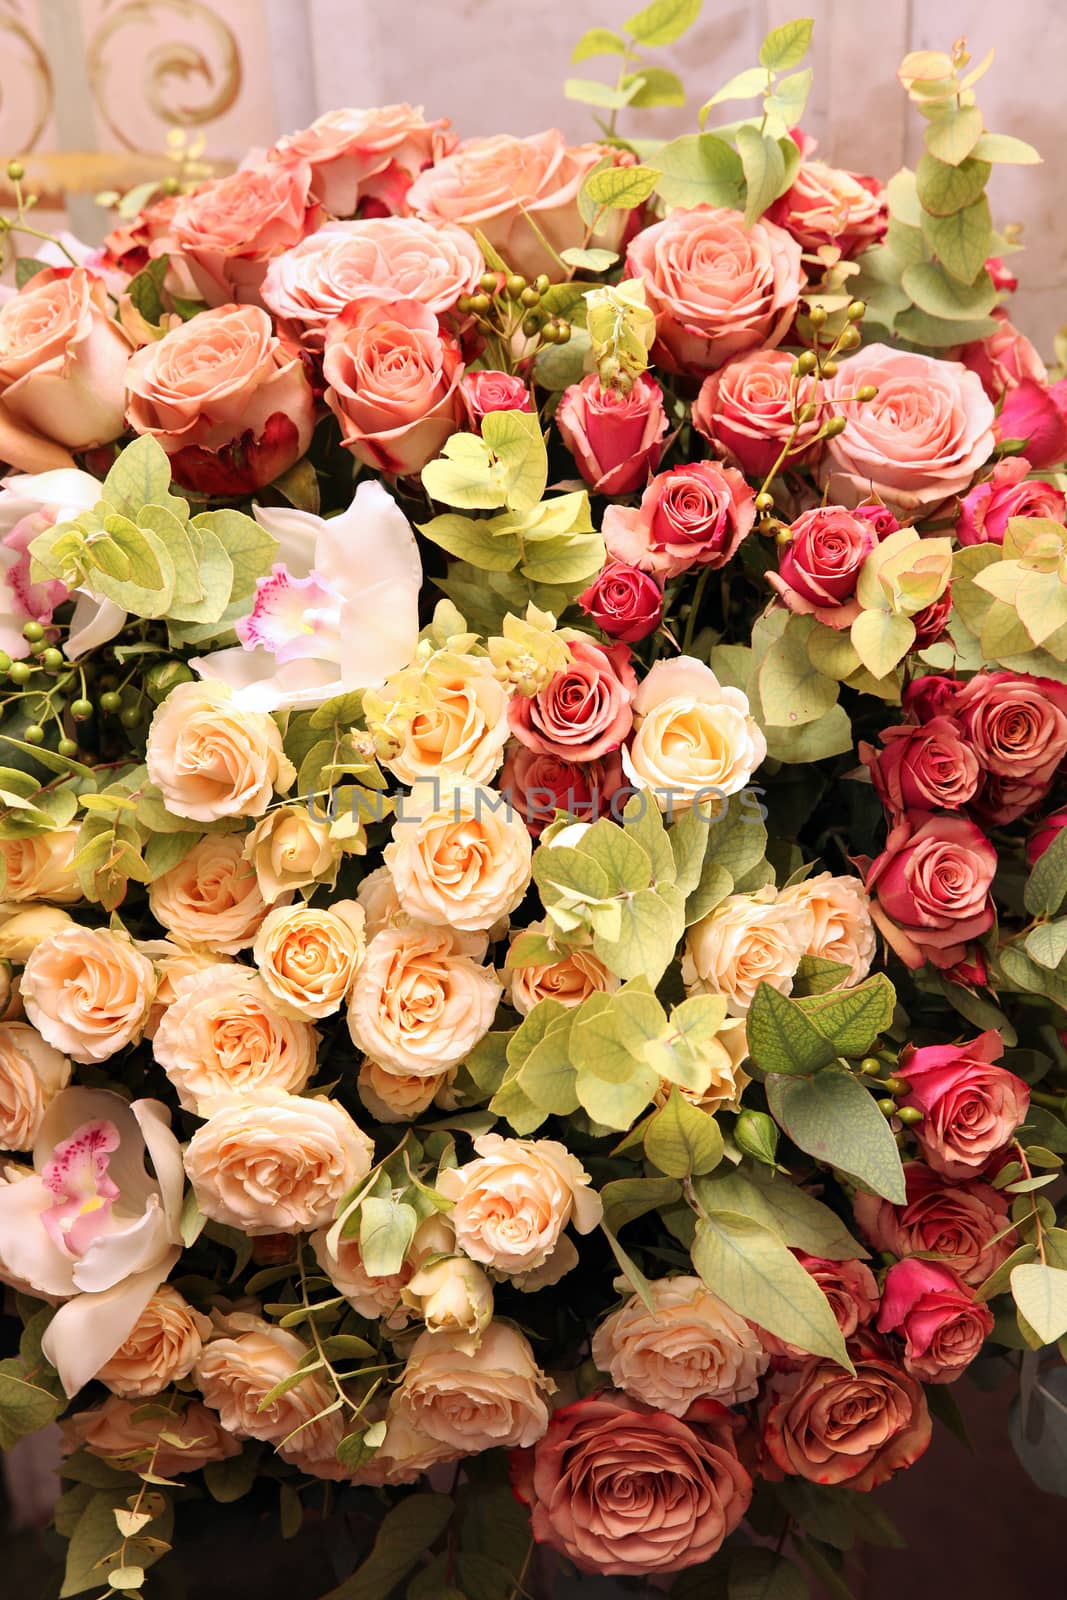 Huge bouquet of roses with orchids by olga_zinovskaya